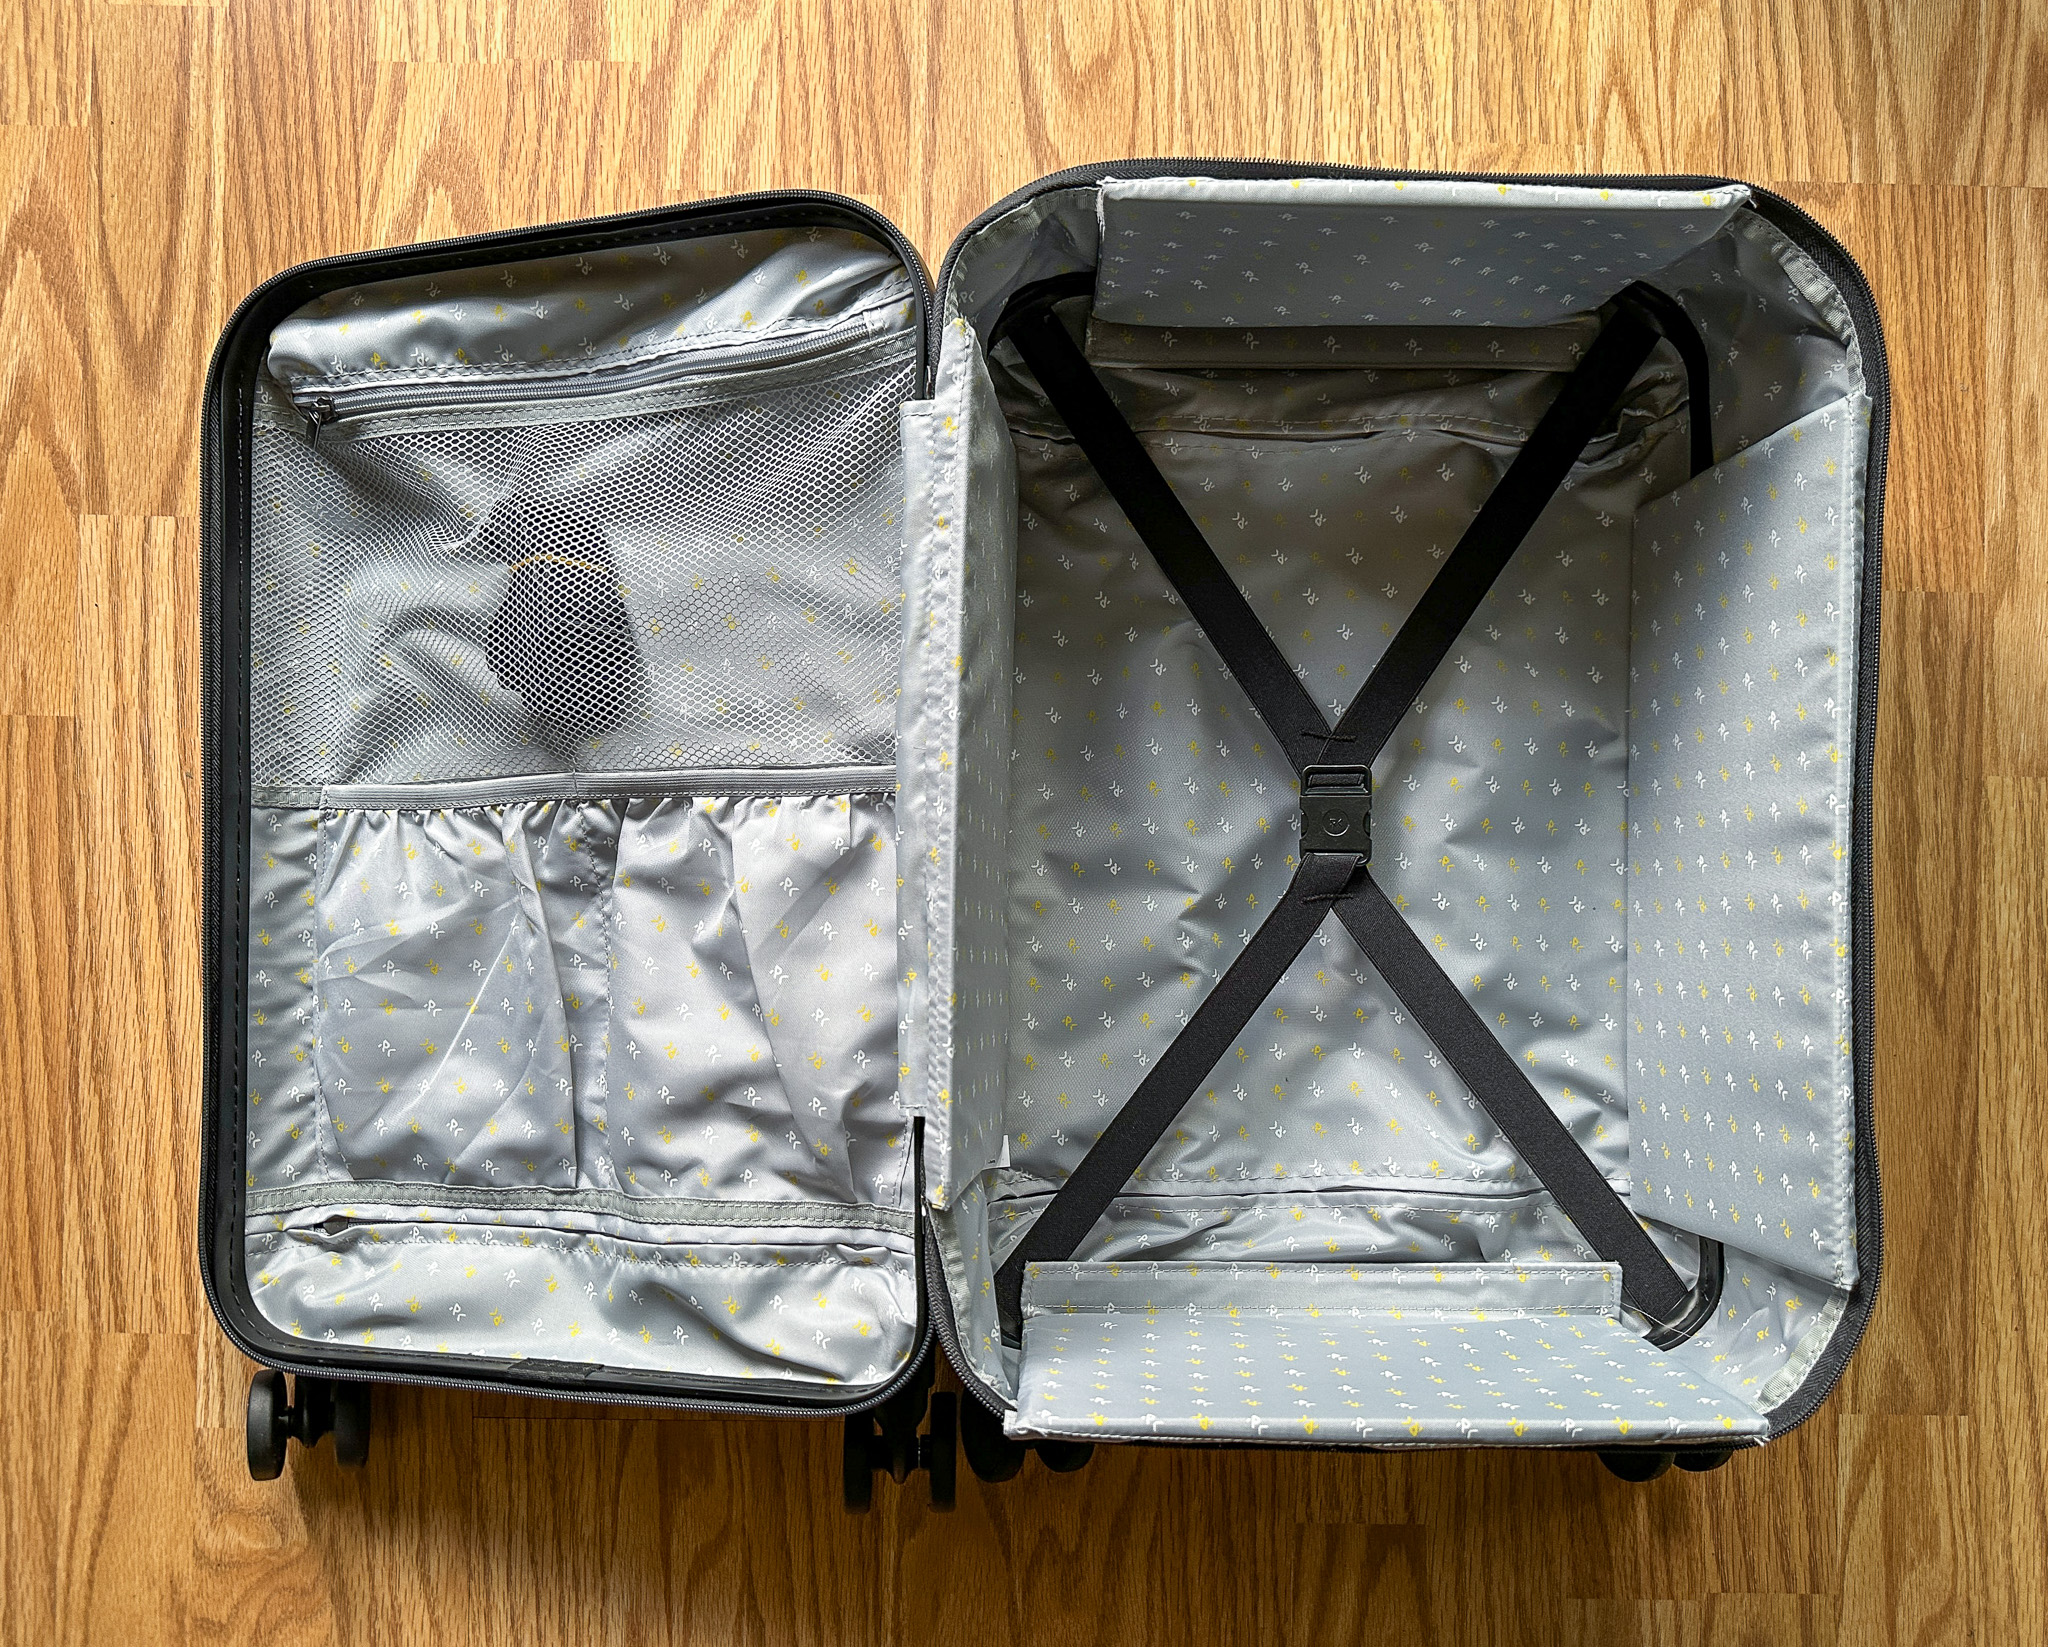 Rollink Review Carry On Suitcase Travel Gear assembled